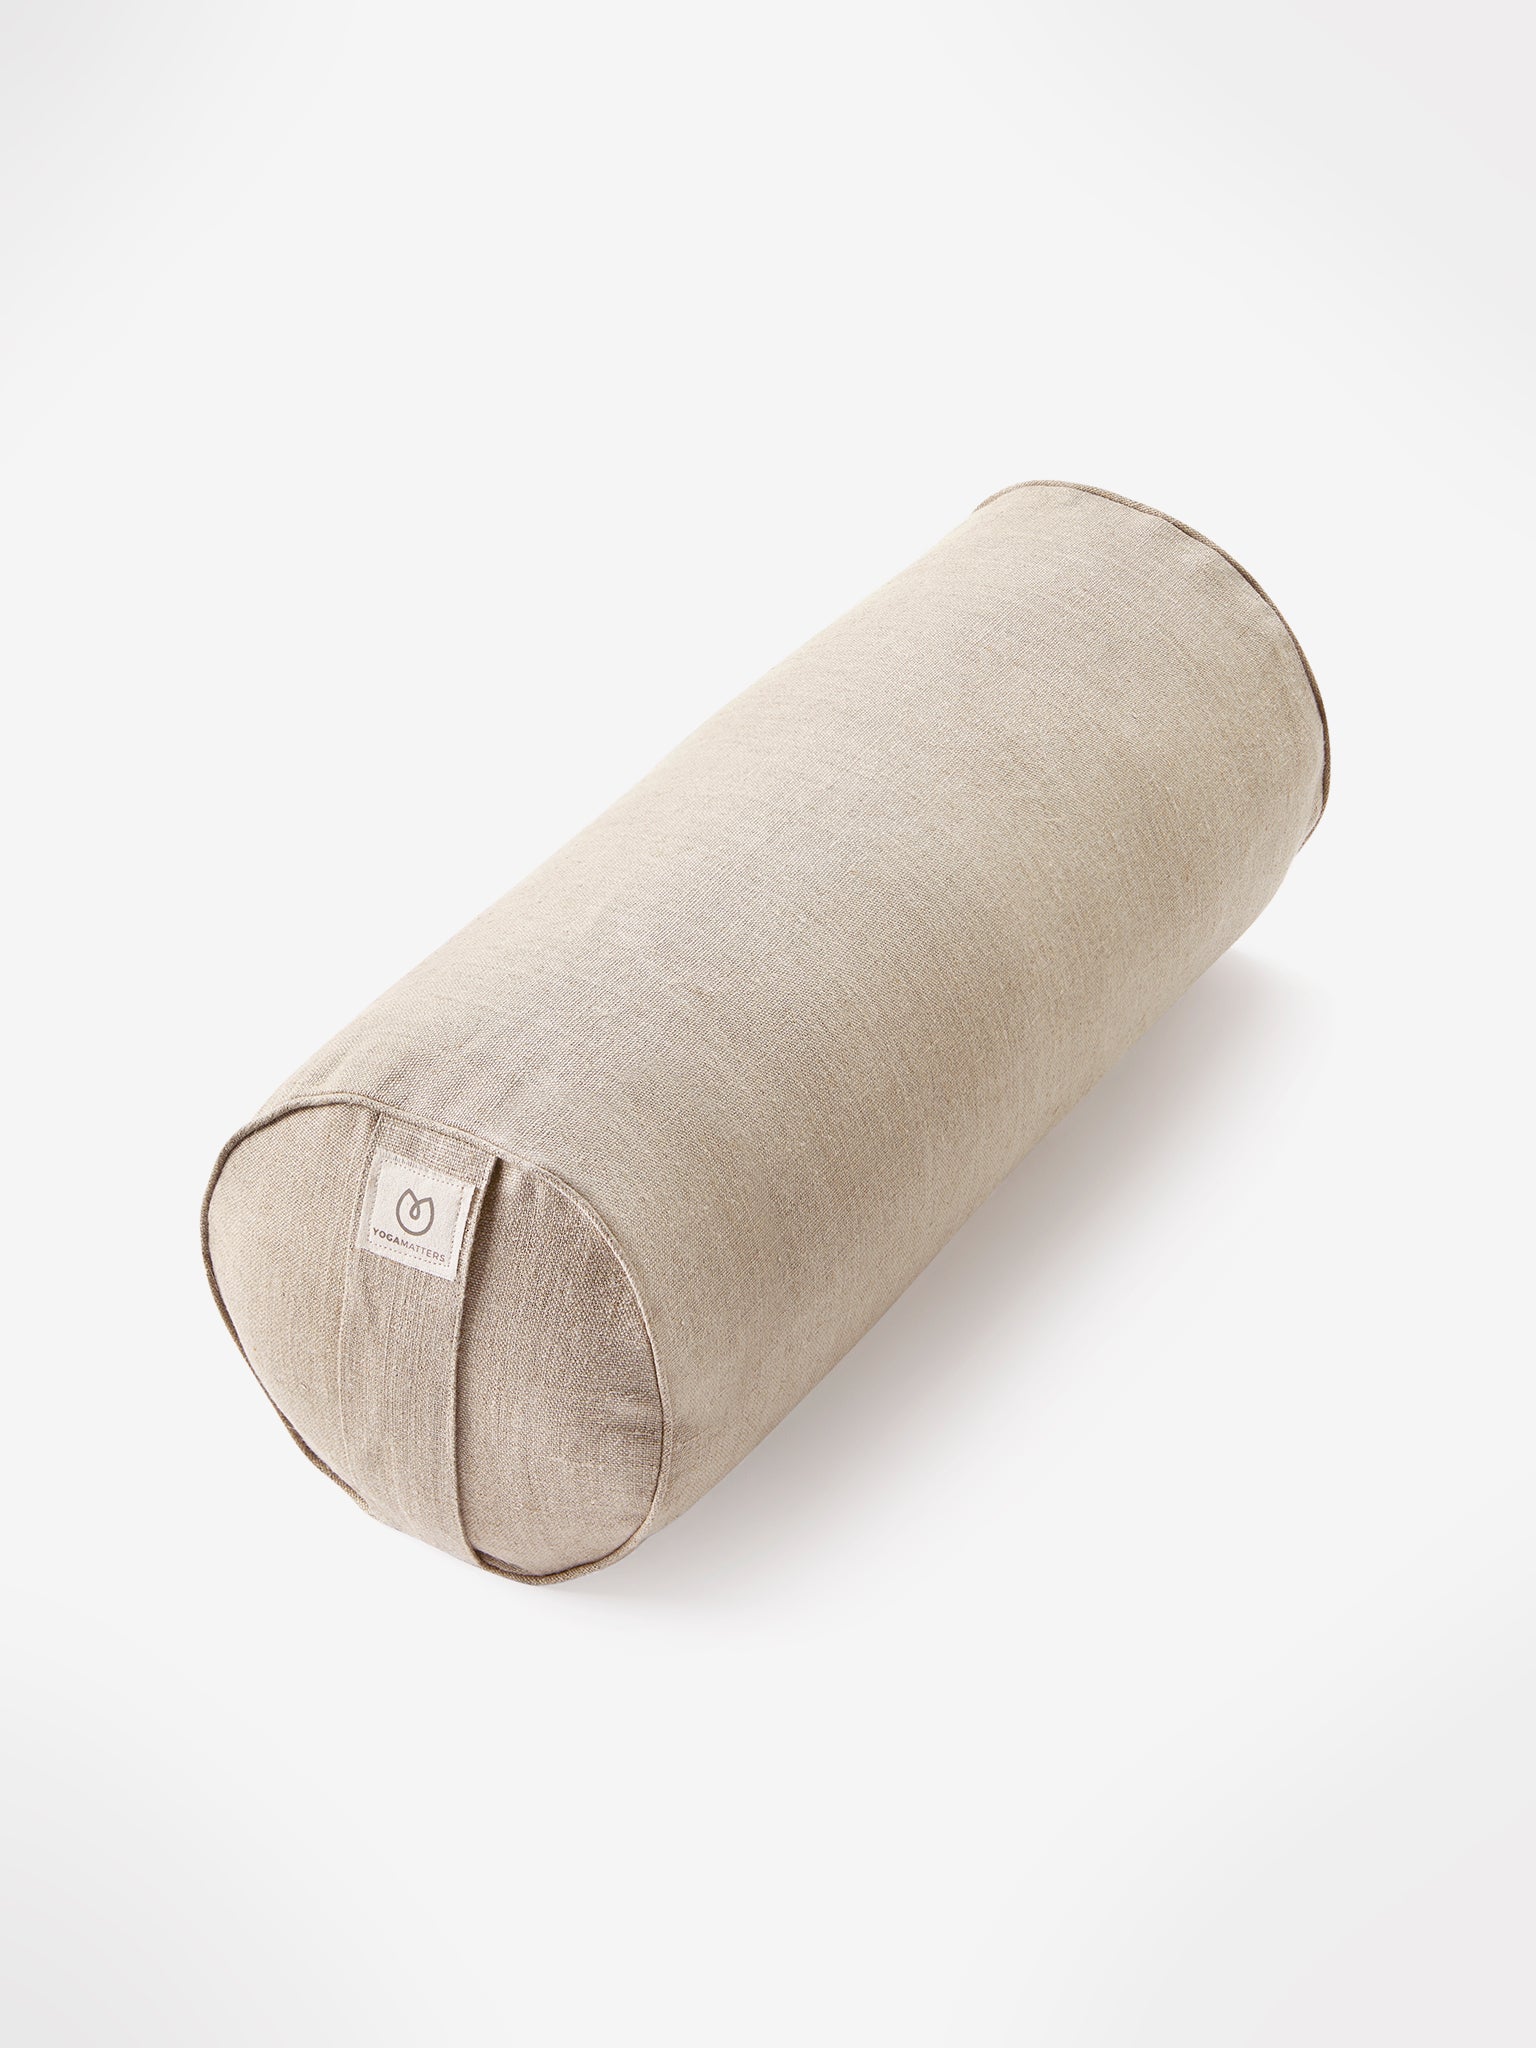 Yogamatters Hemp Bolster Cover Only - Natural